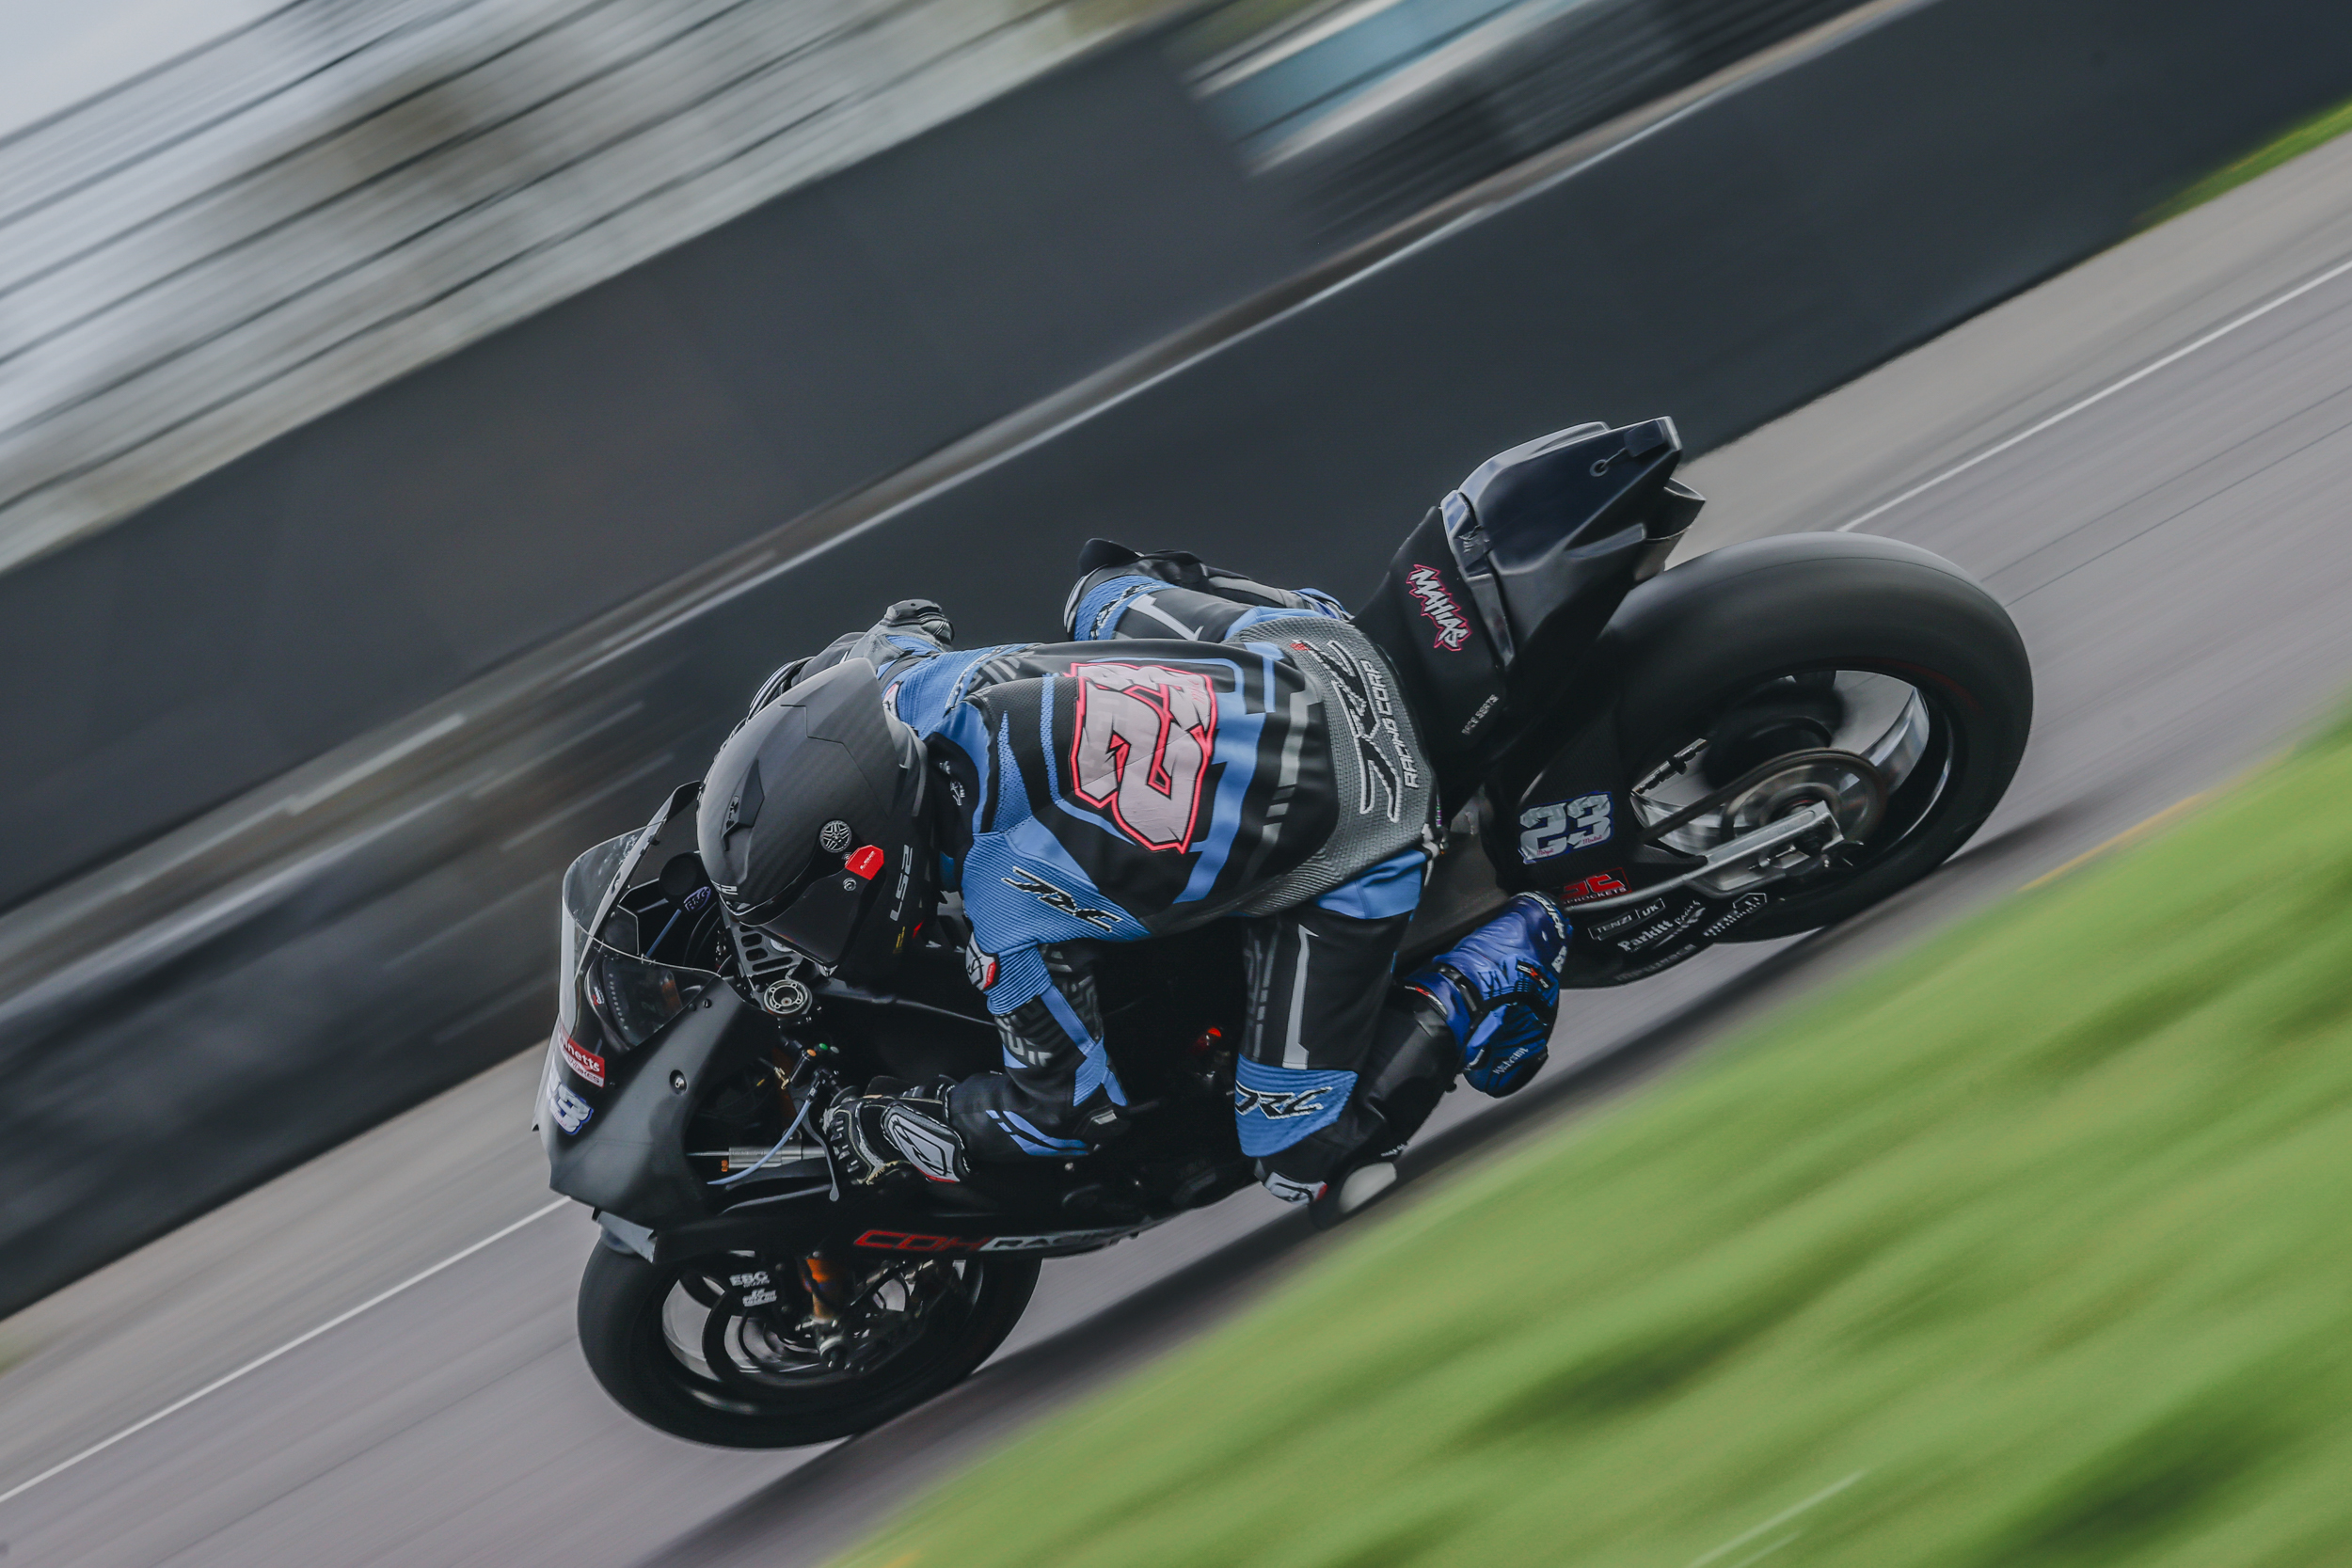 Luke Hedger Shows Resilience And Progress At Donington Park Bsb Test